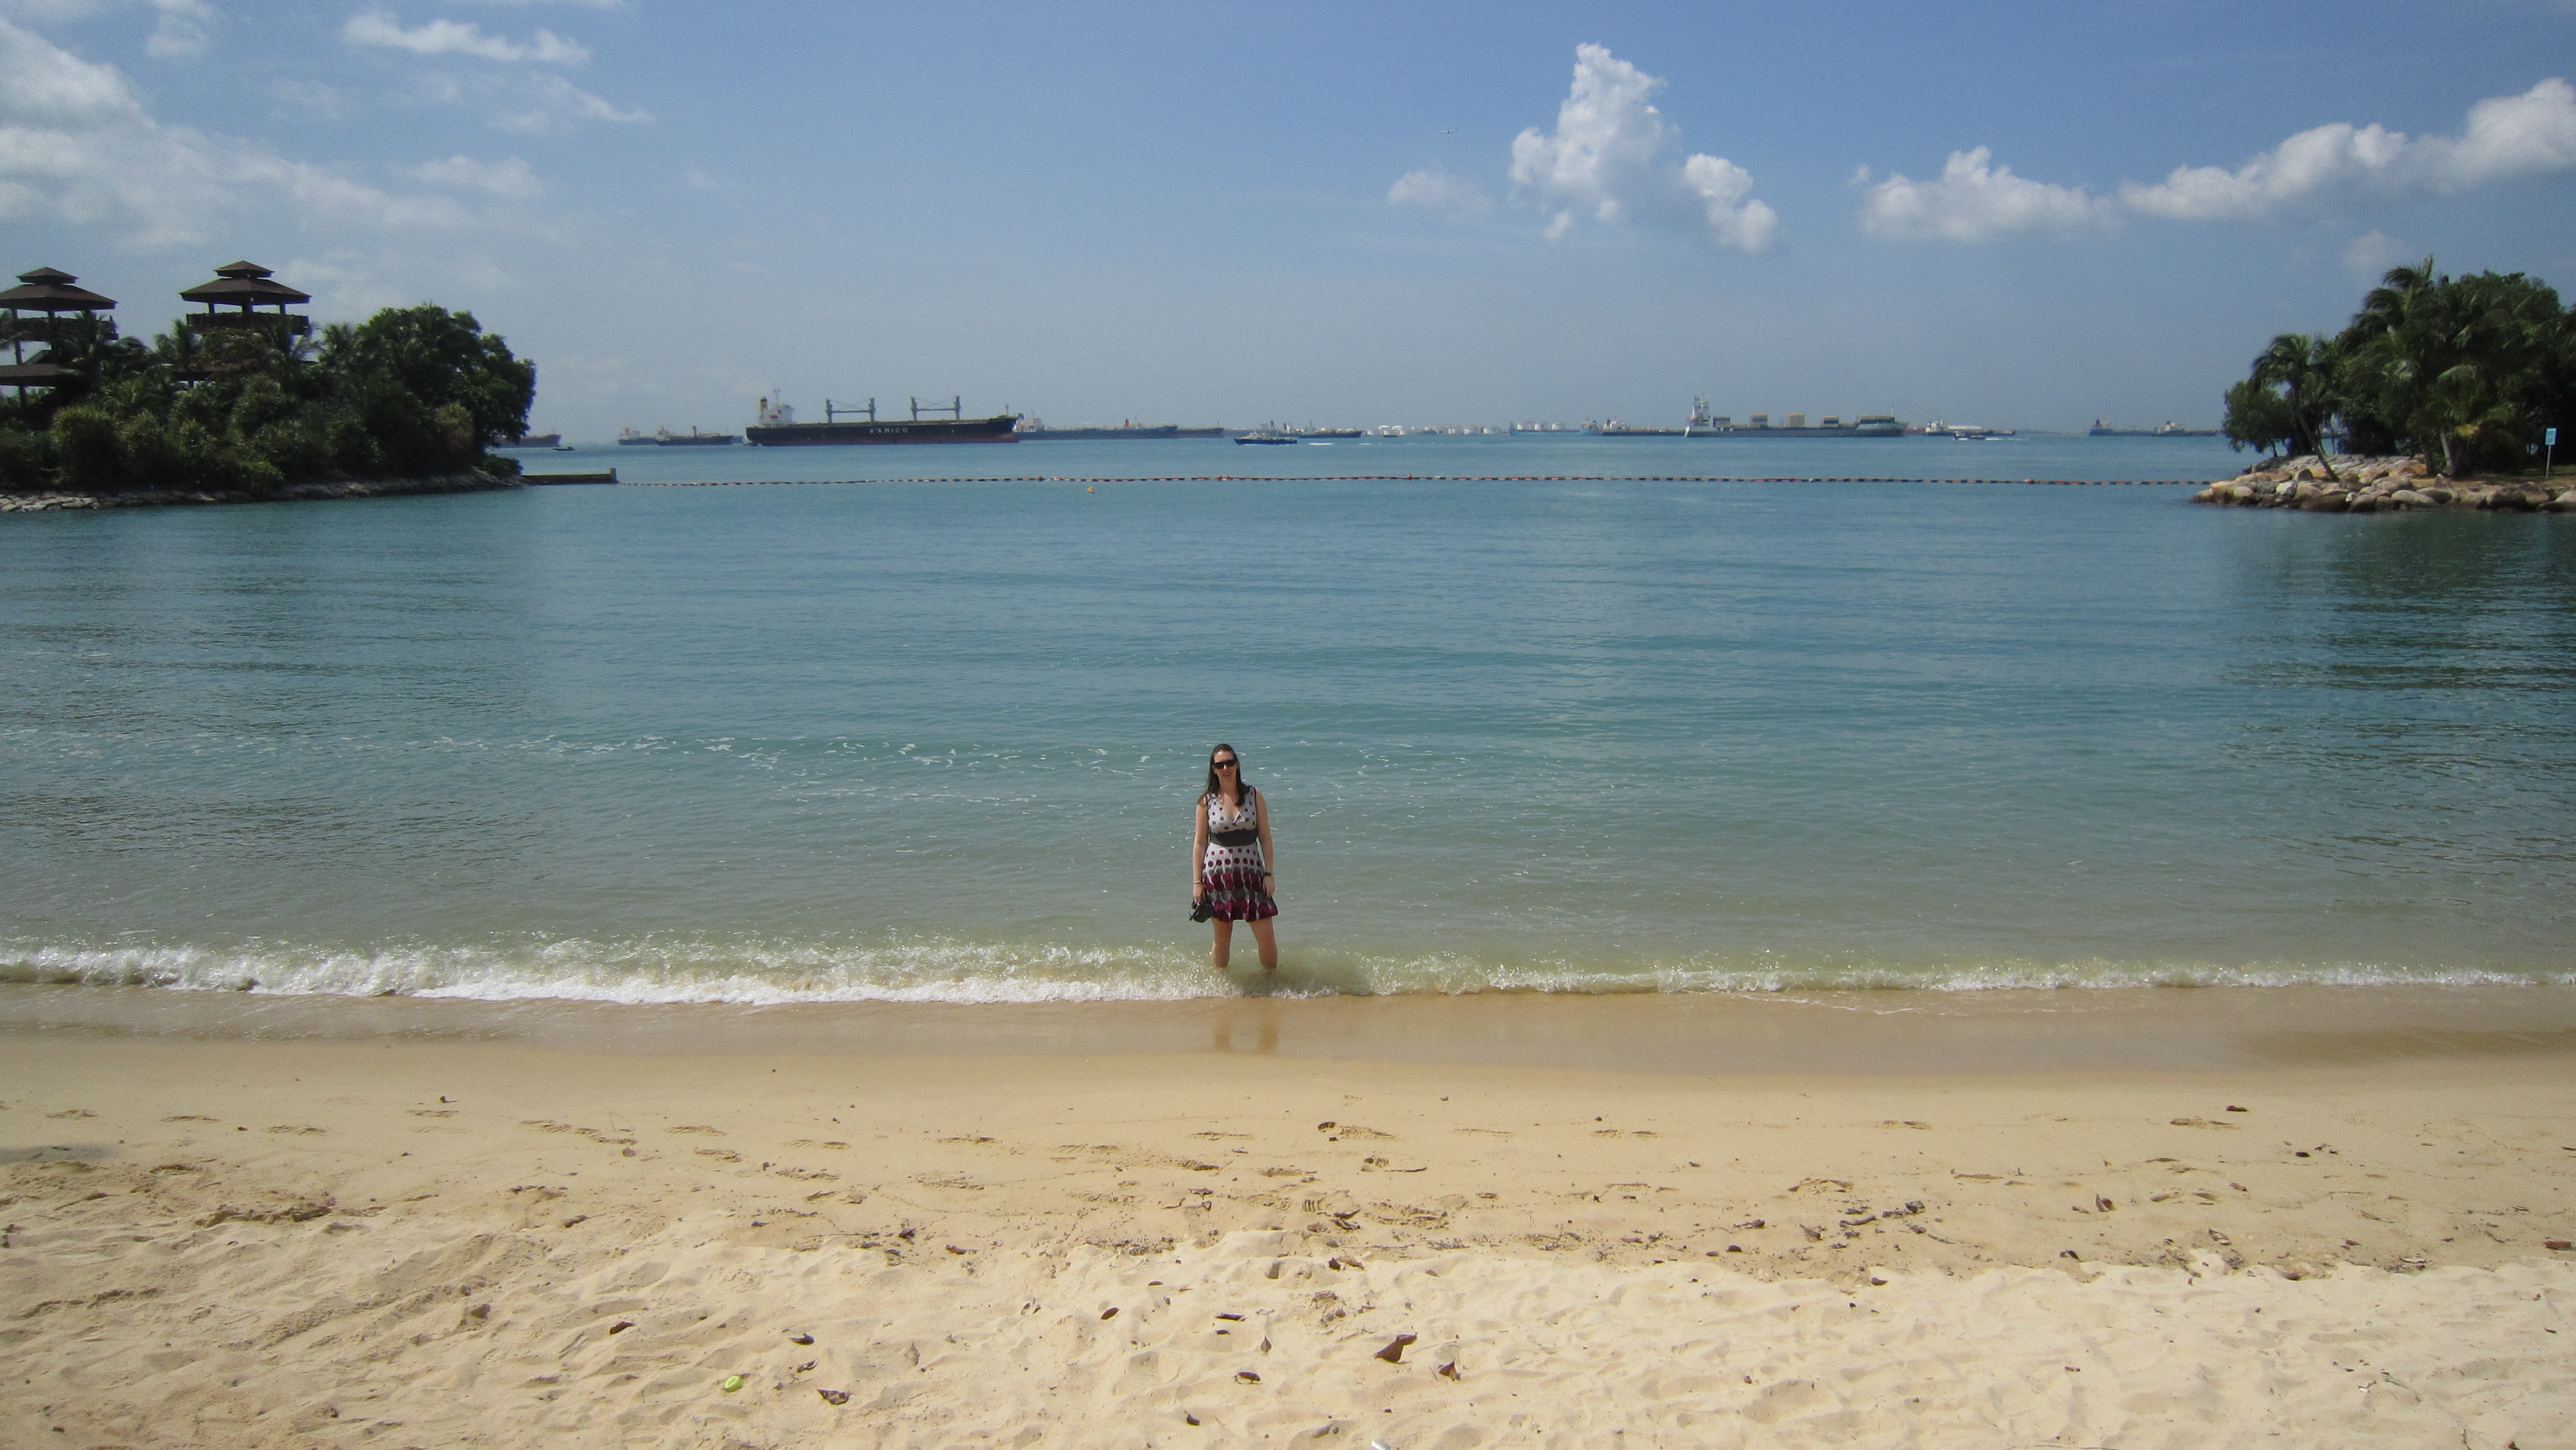 Sentosa - a lovely view of 100 ships!